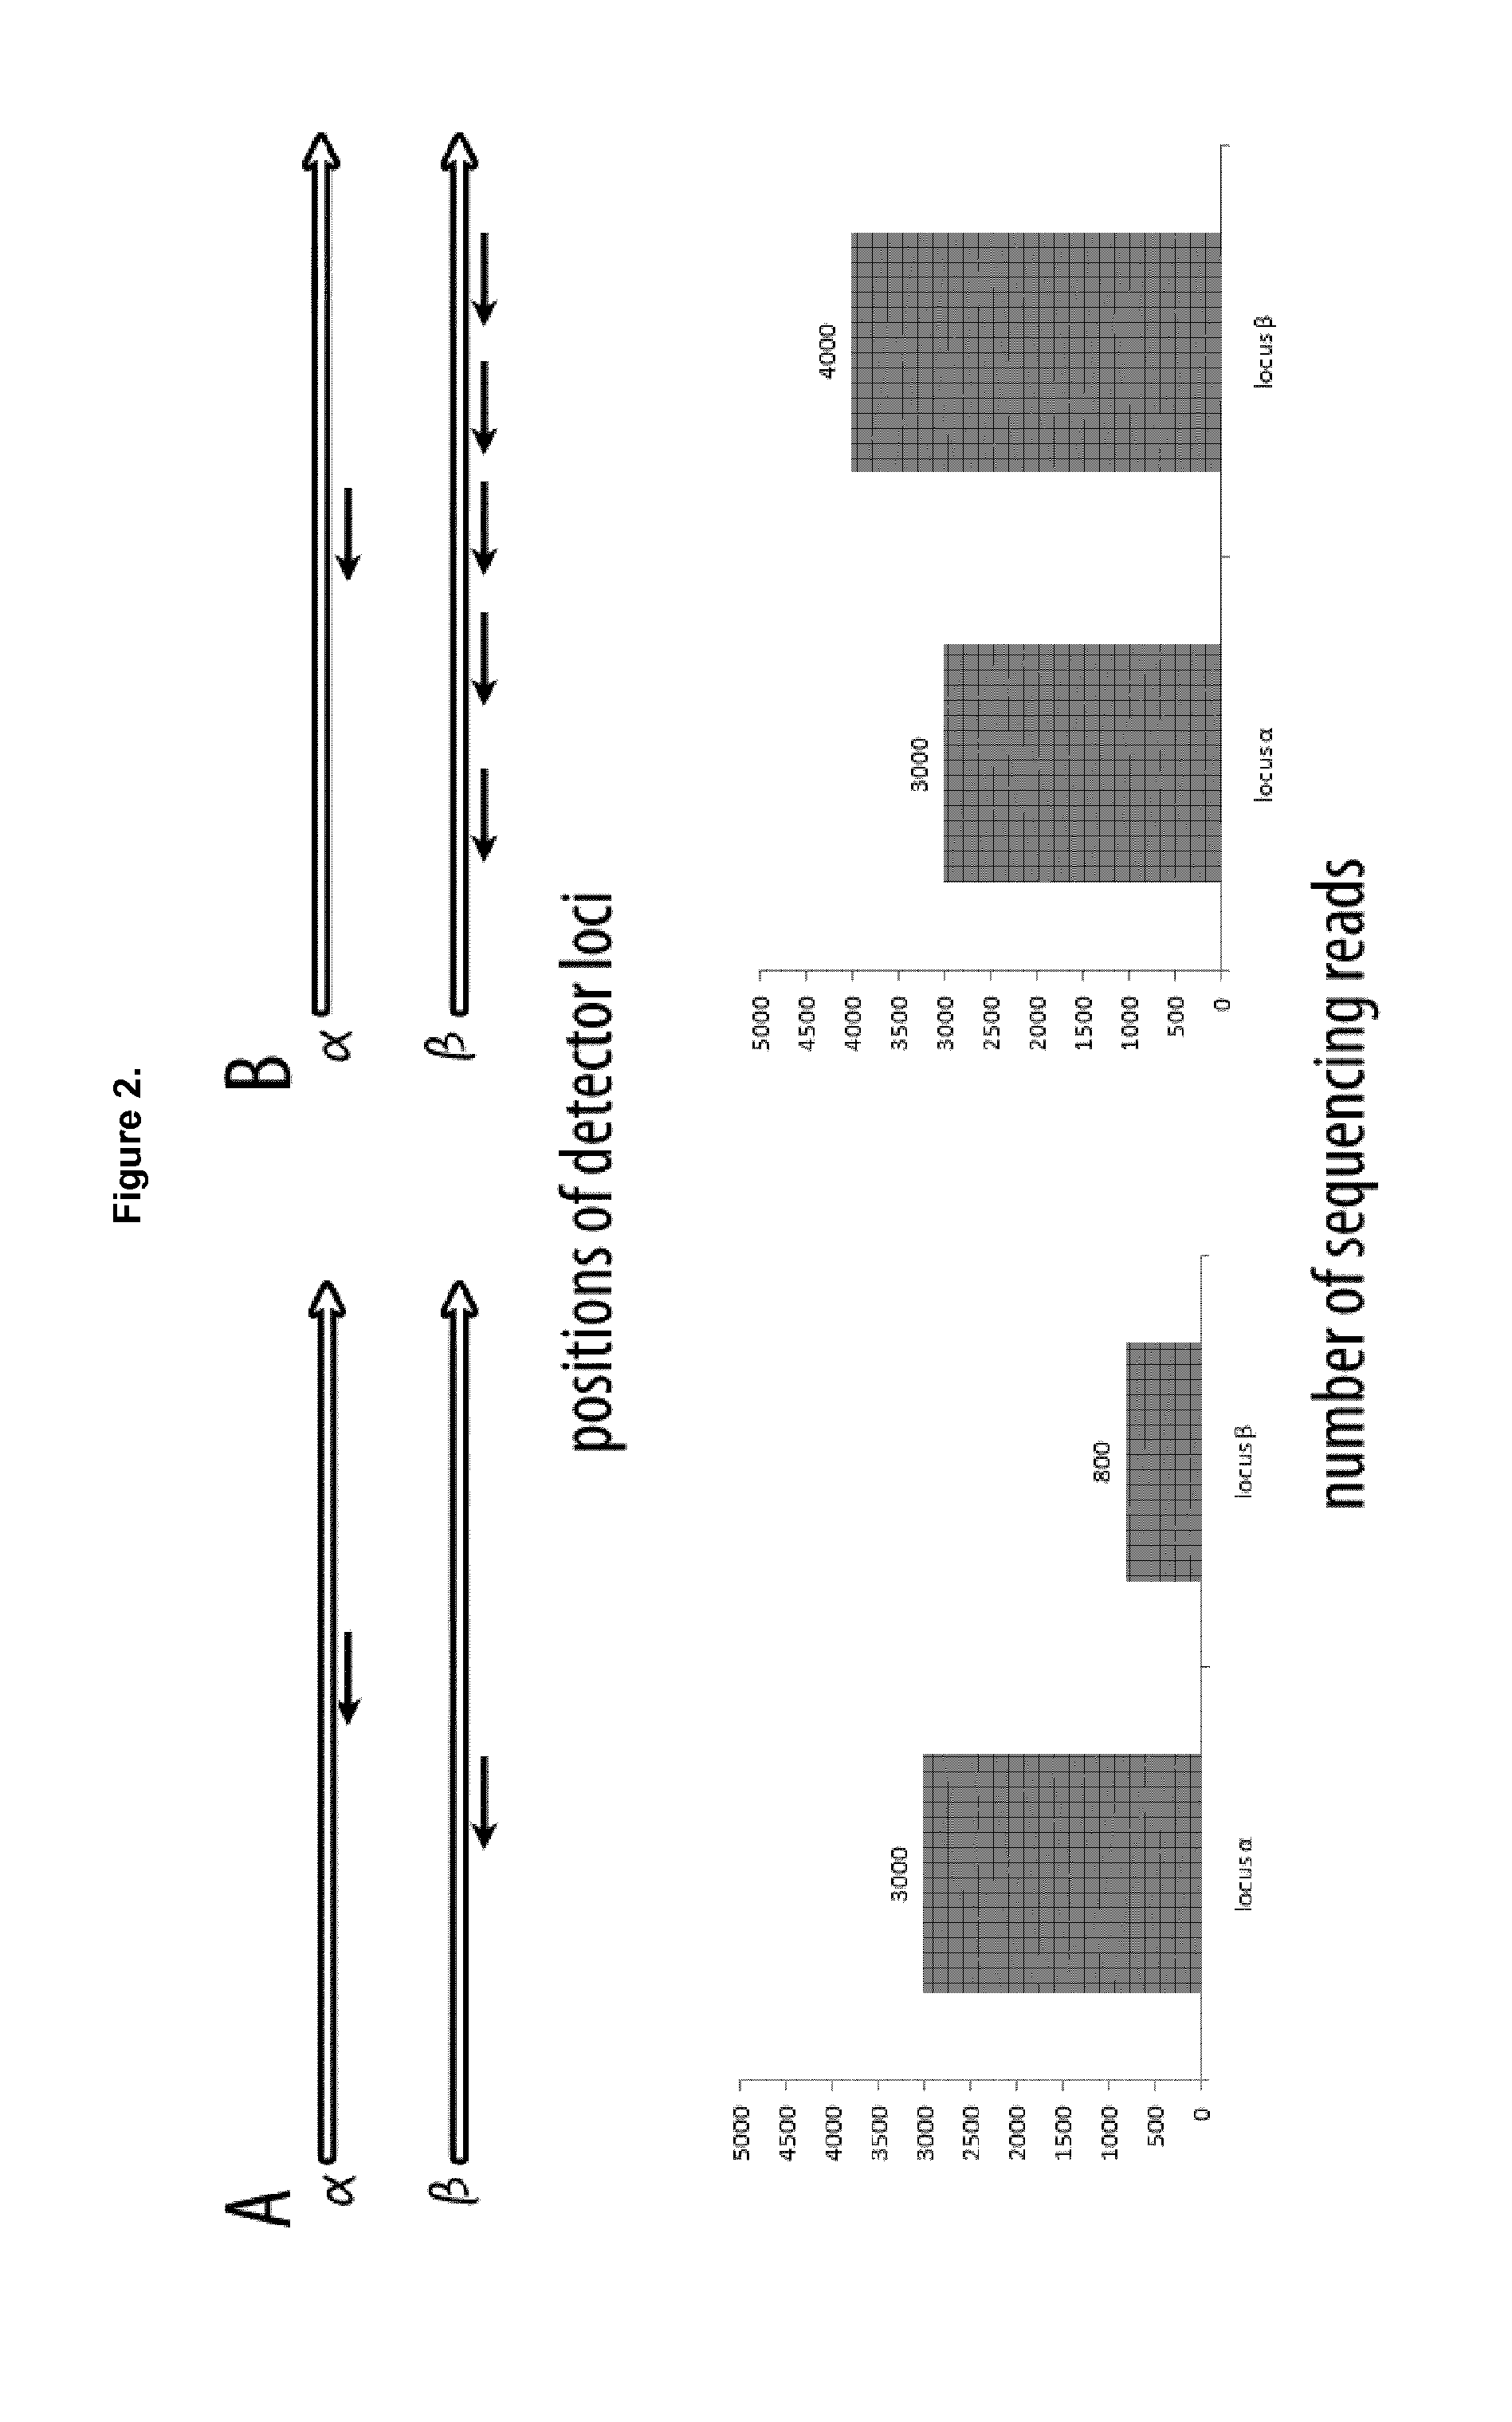 Method of analysis of composition of nucleic acid mixtures